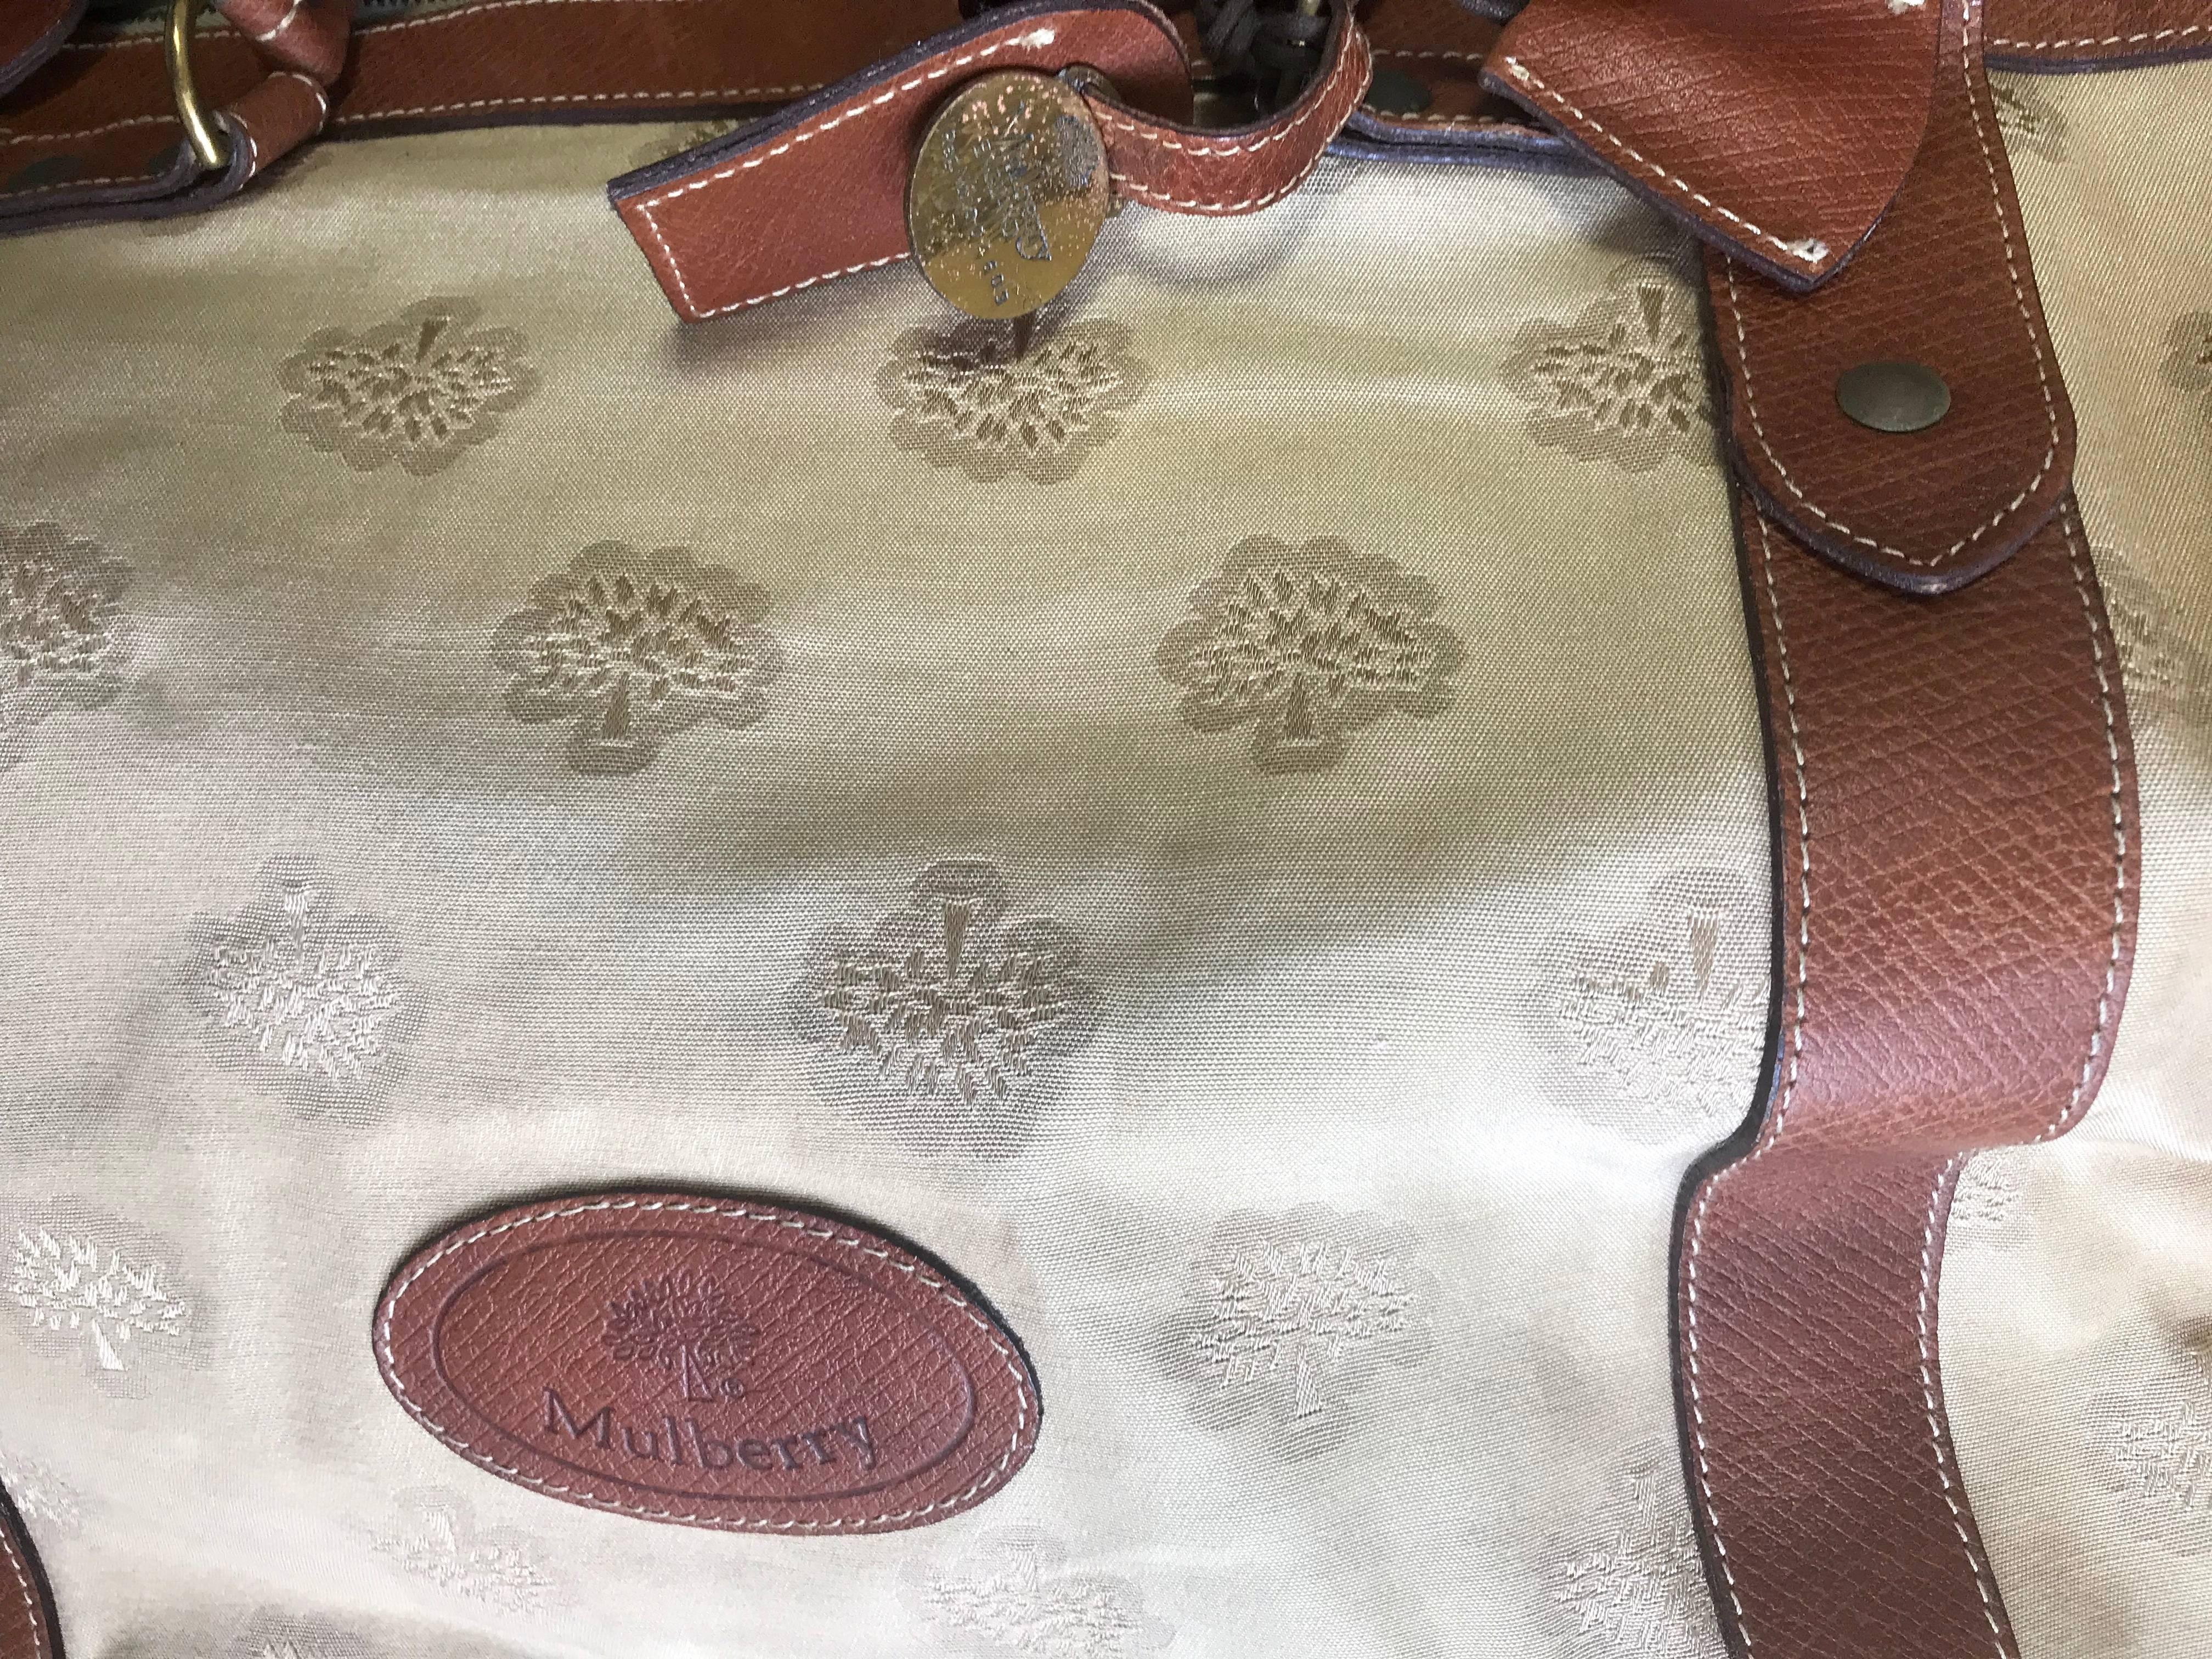 Vintage Mulberry beige logo jacquard fabric travel bag, duffle bag with leather. 9